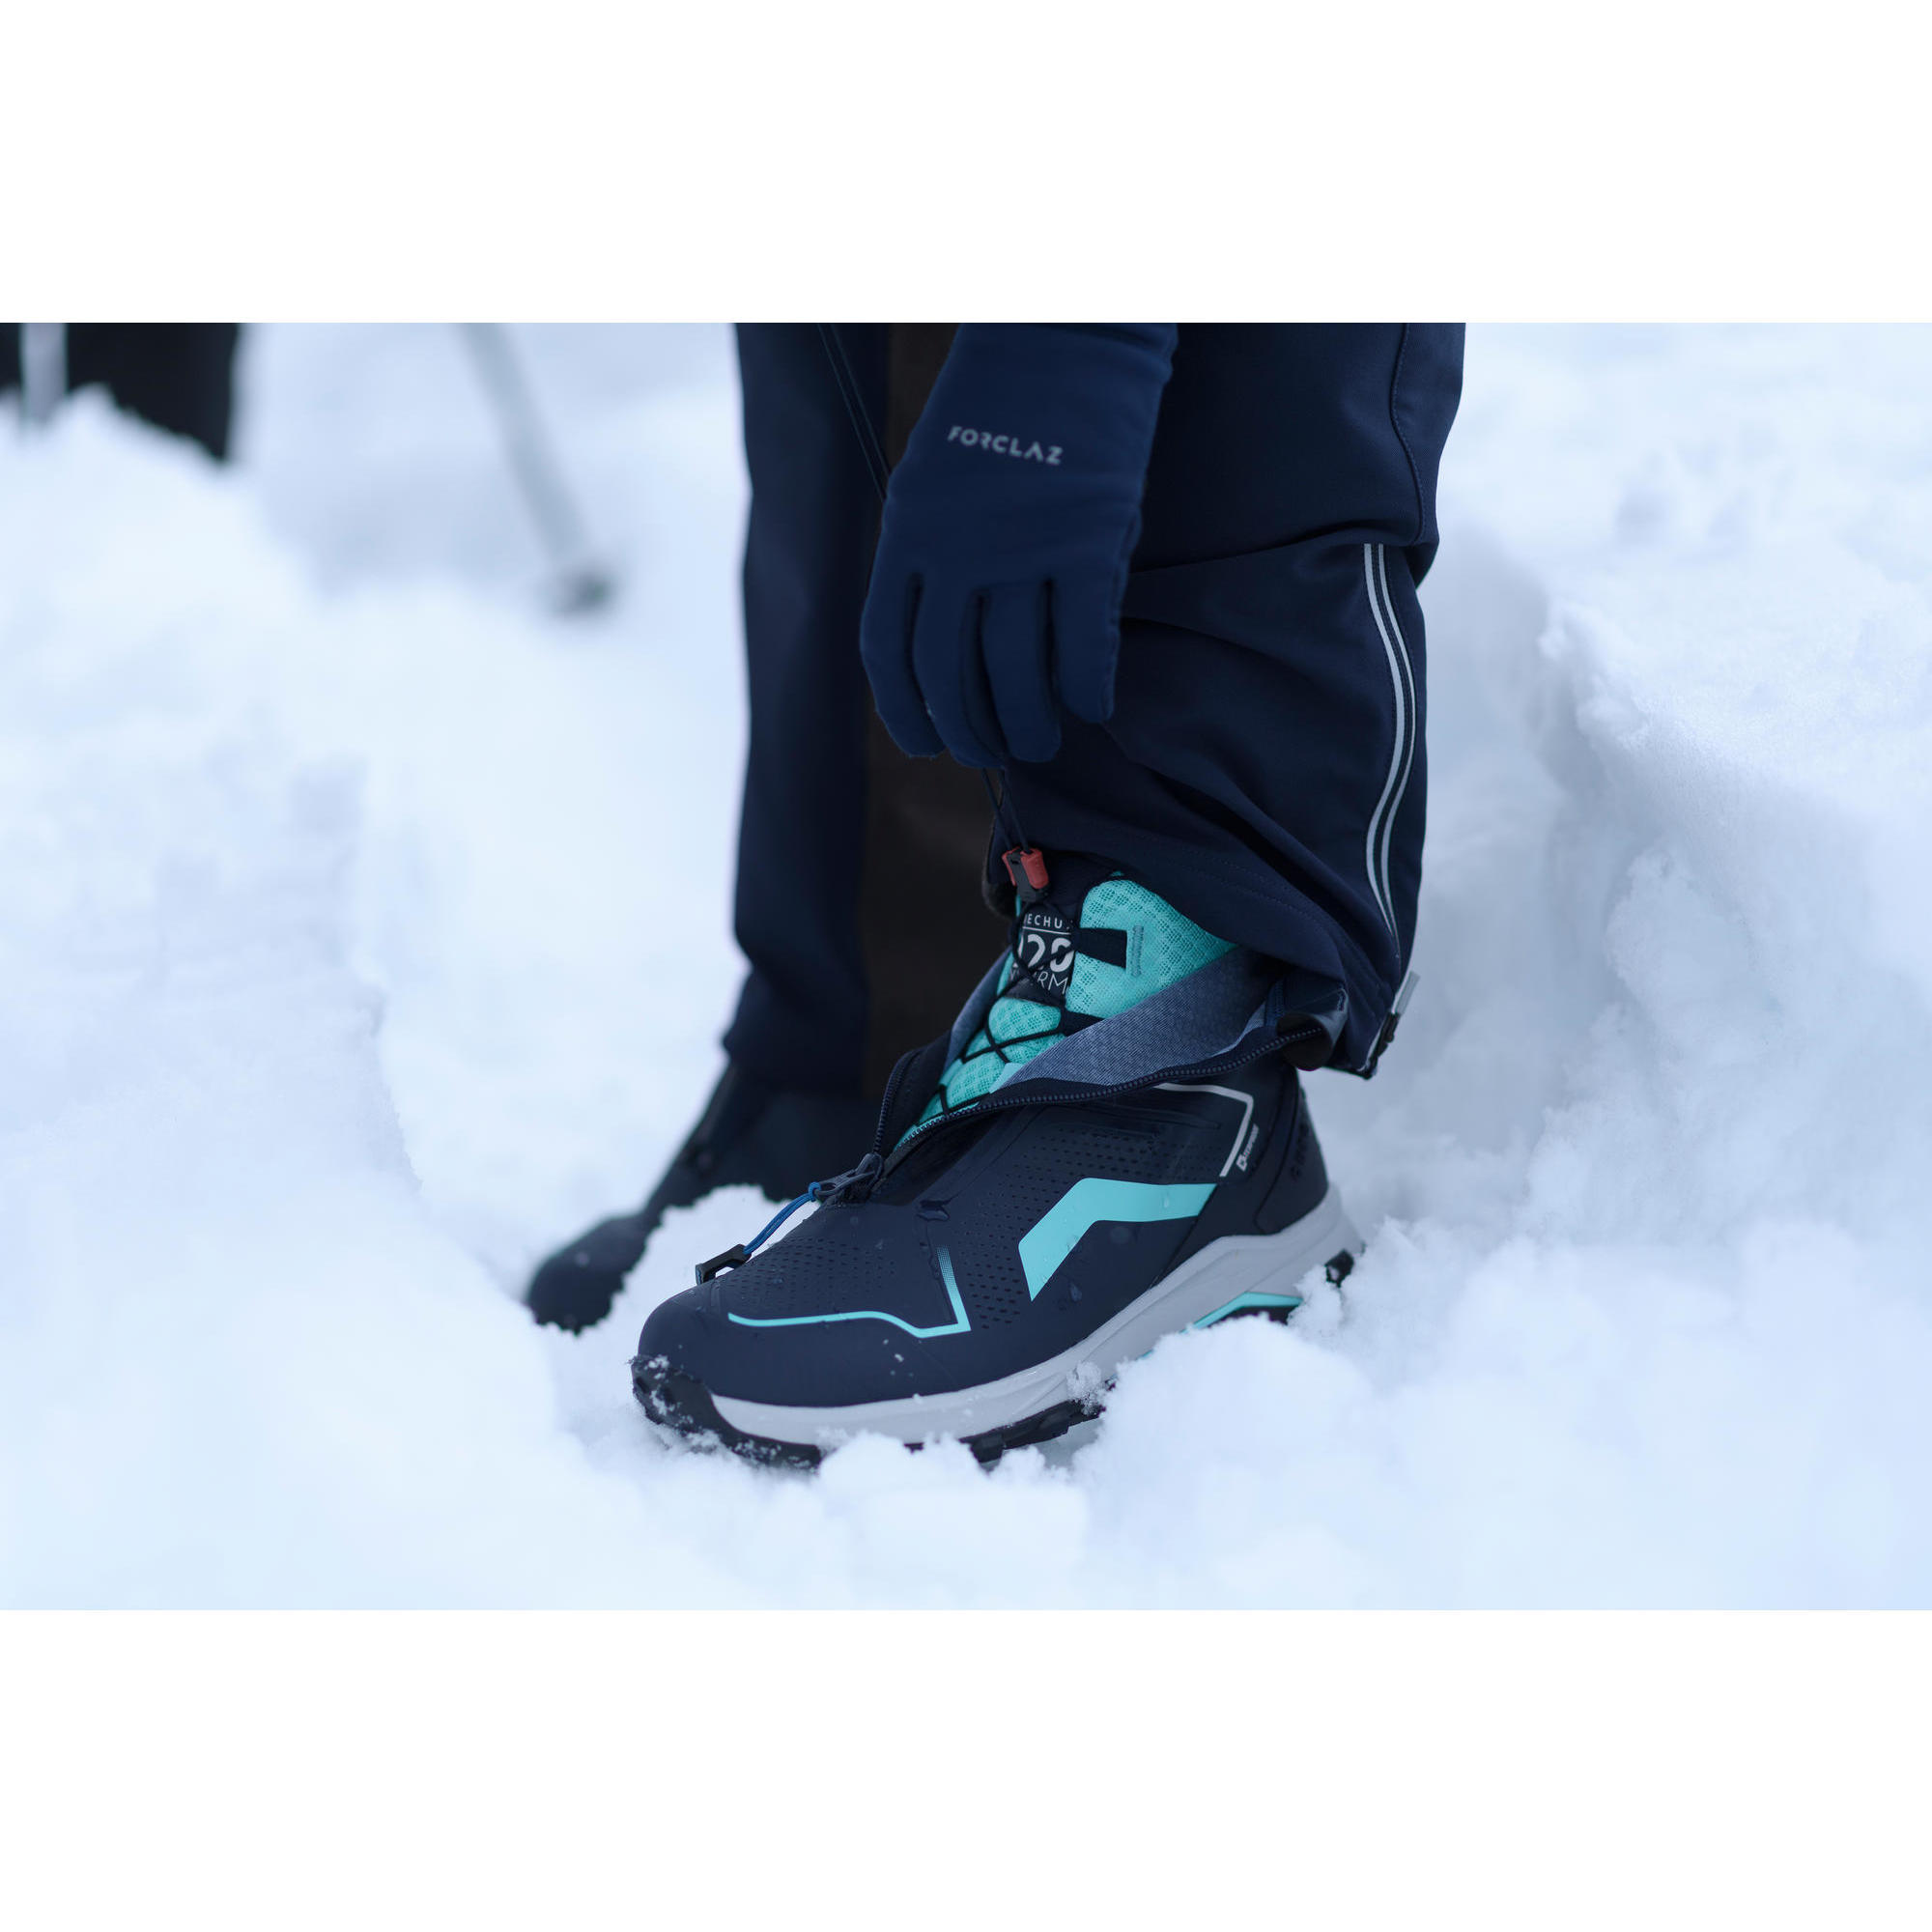 sports shoes for snow